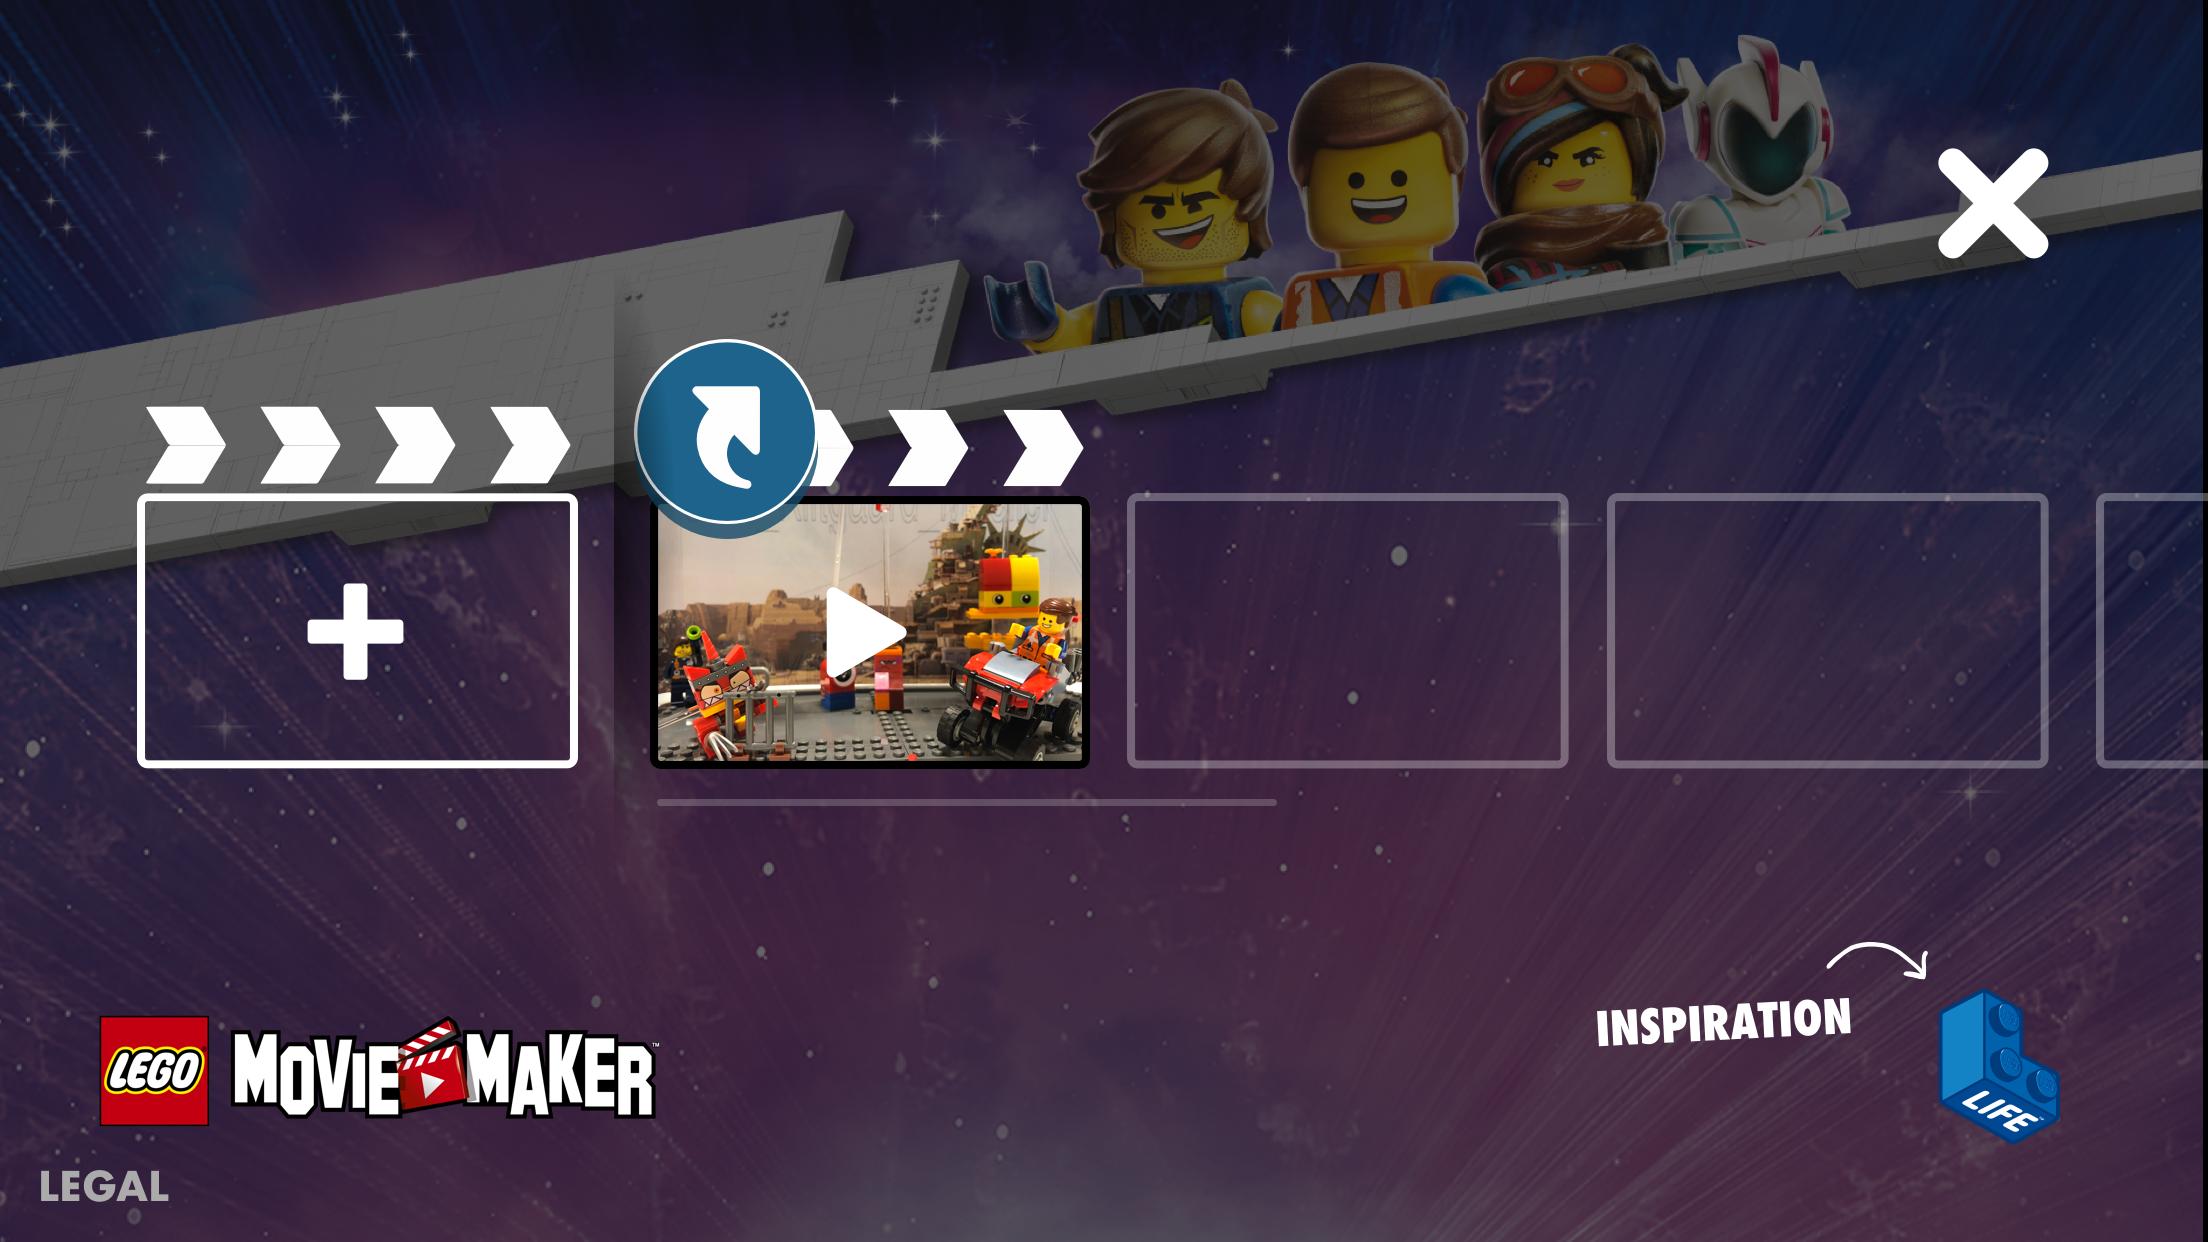 The Lego Movie 2 Movie Maker For Android Apk Download - movie maker roblox super hero